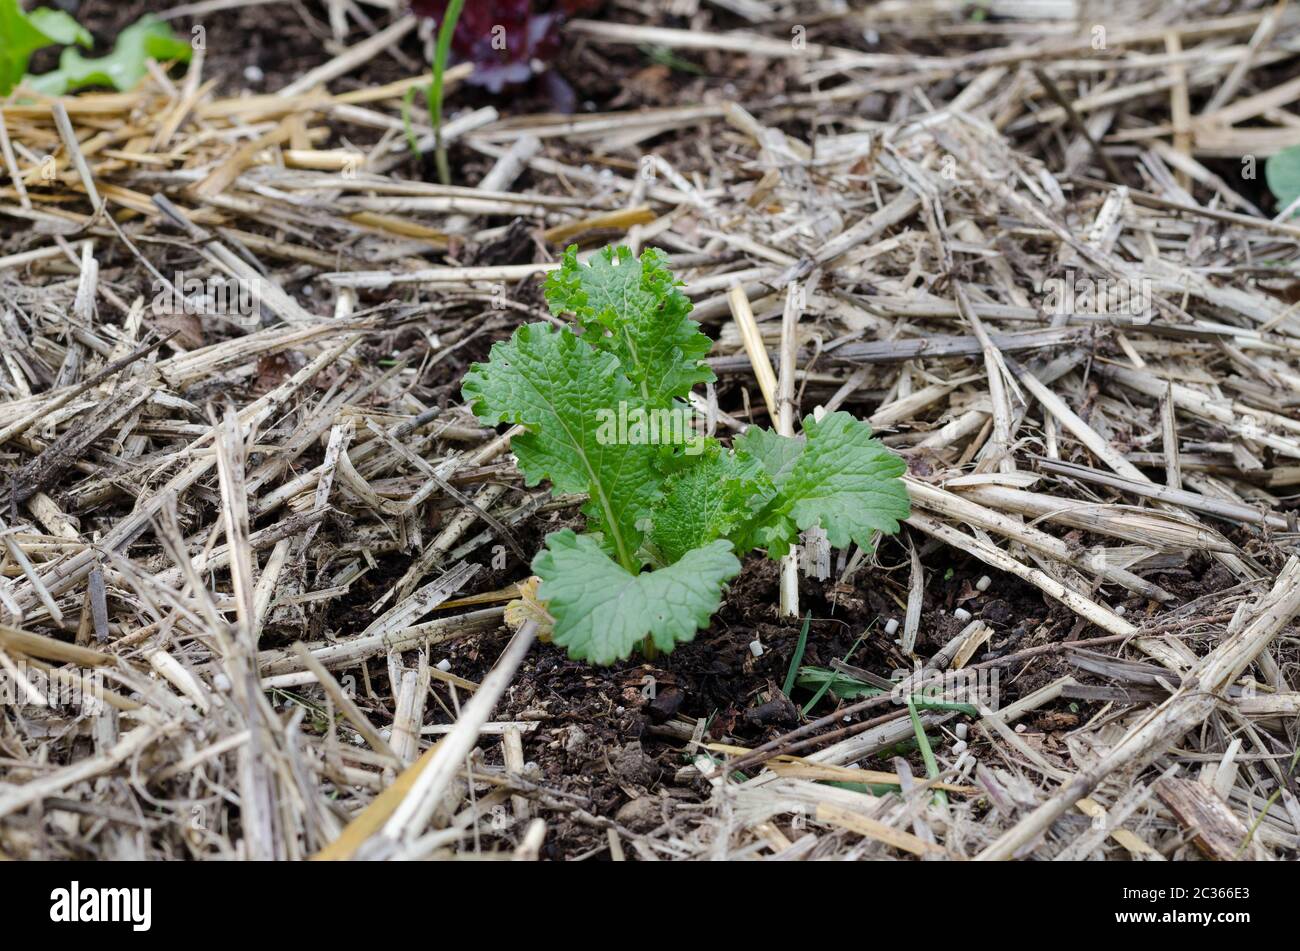 A young mustard plant in a mulched garden bed Stock Photo